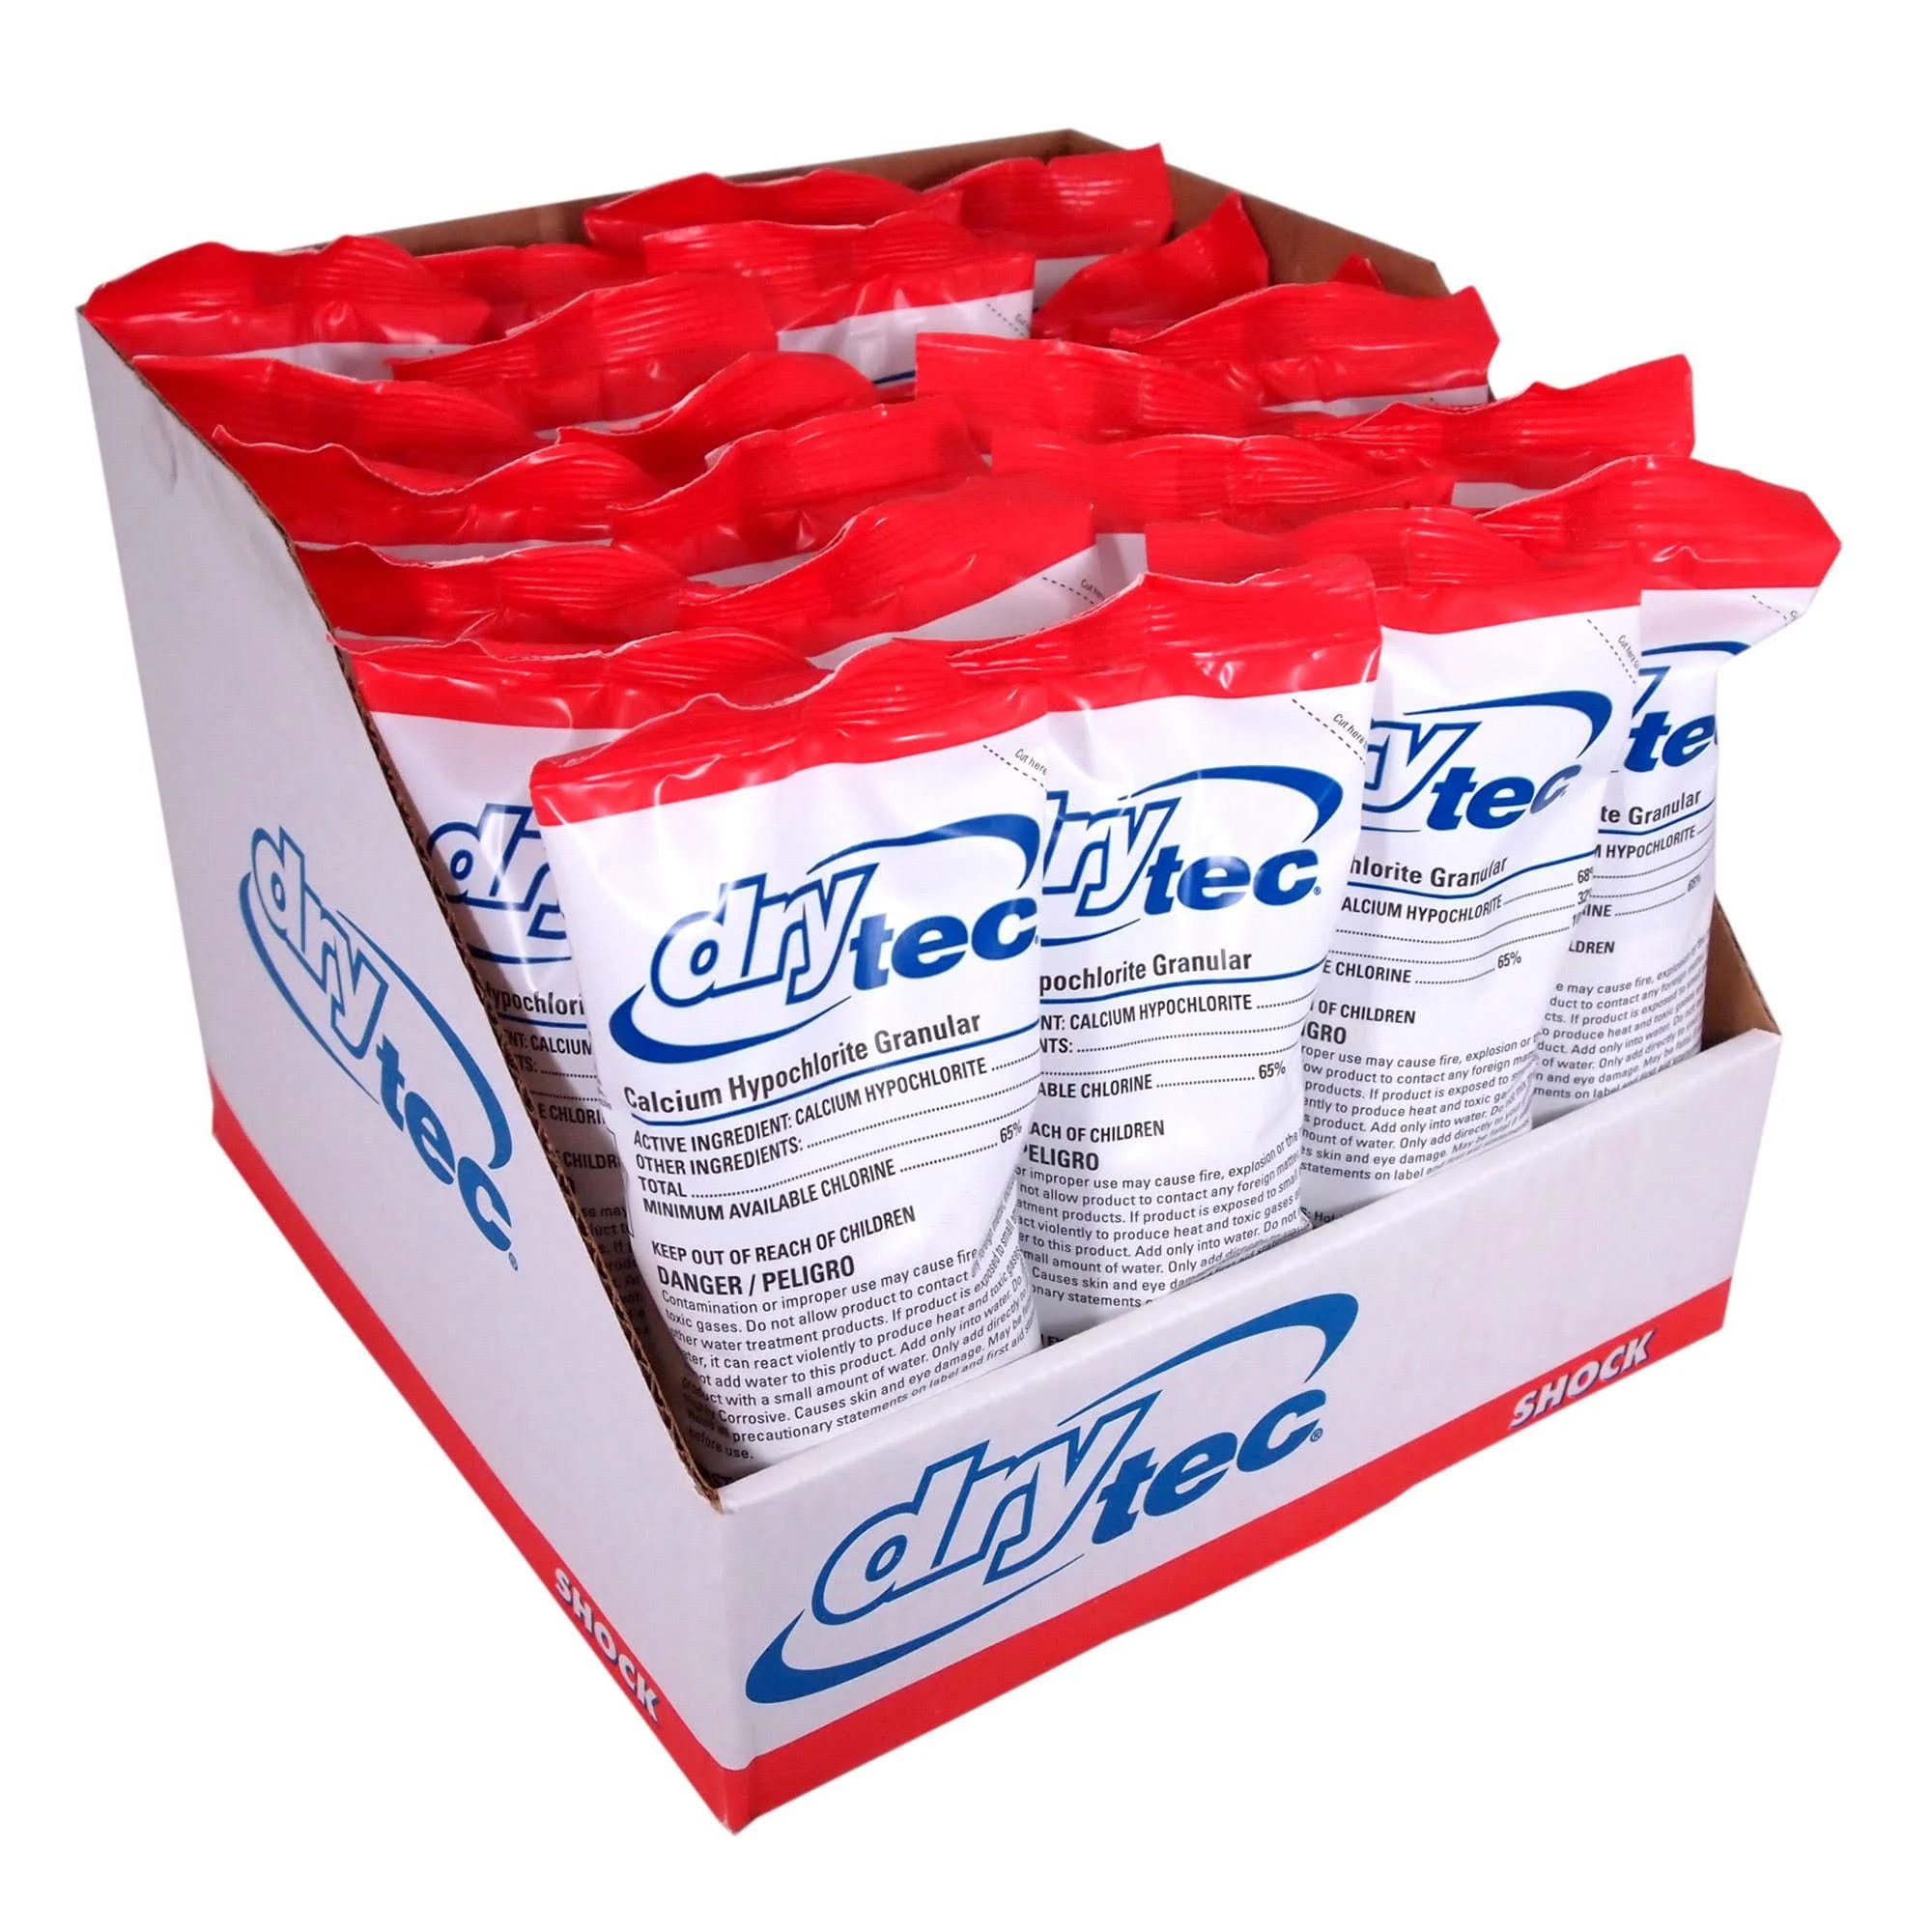 DryTec Calcium Hypochlorite Pool Shock for Clear Water | Image